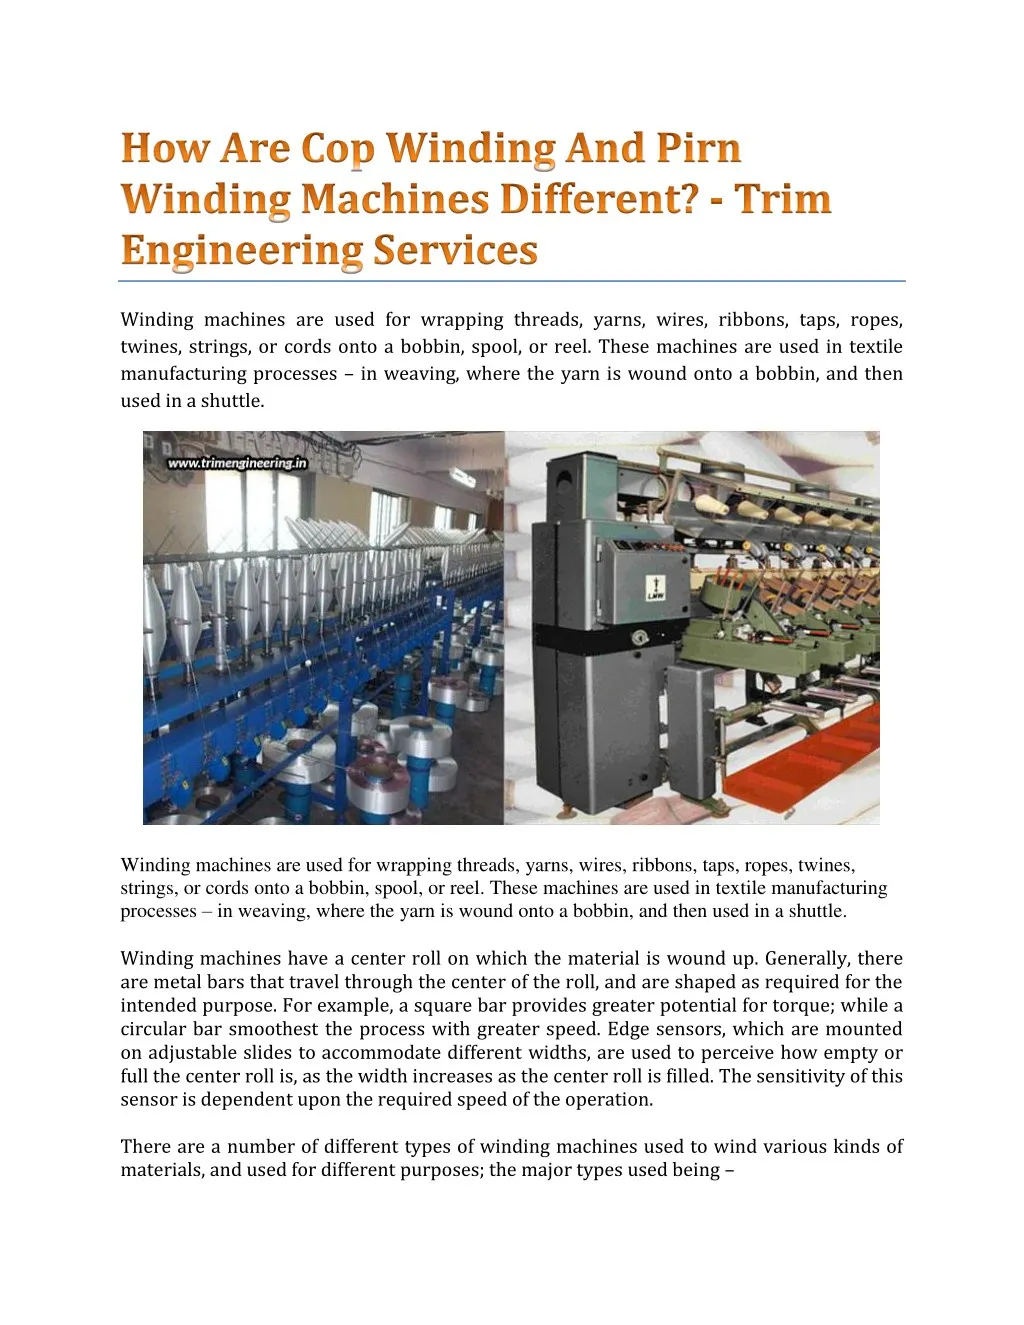 winding machines are used for wrapping threads